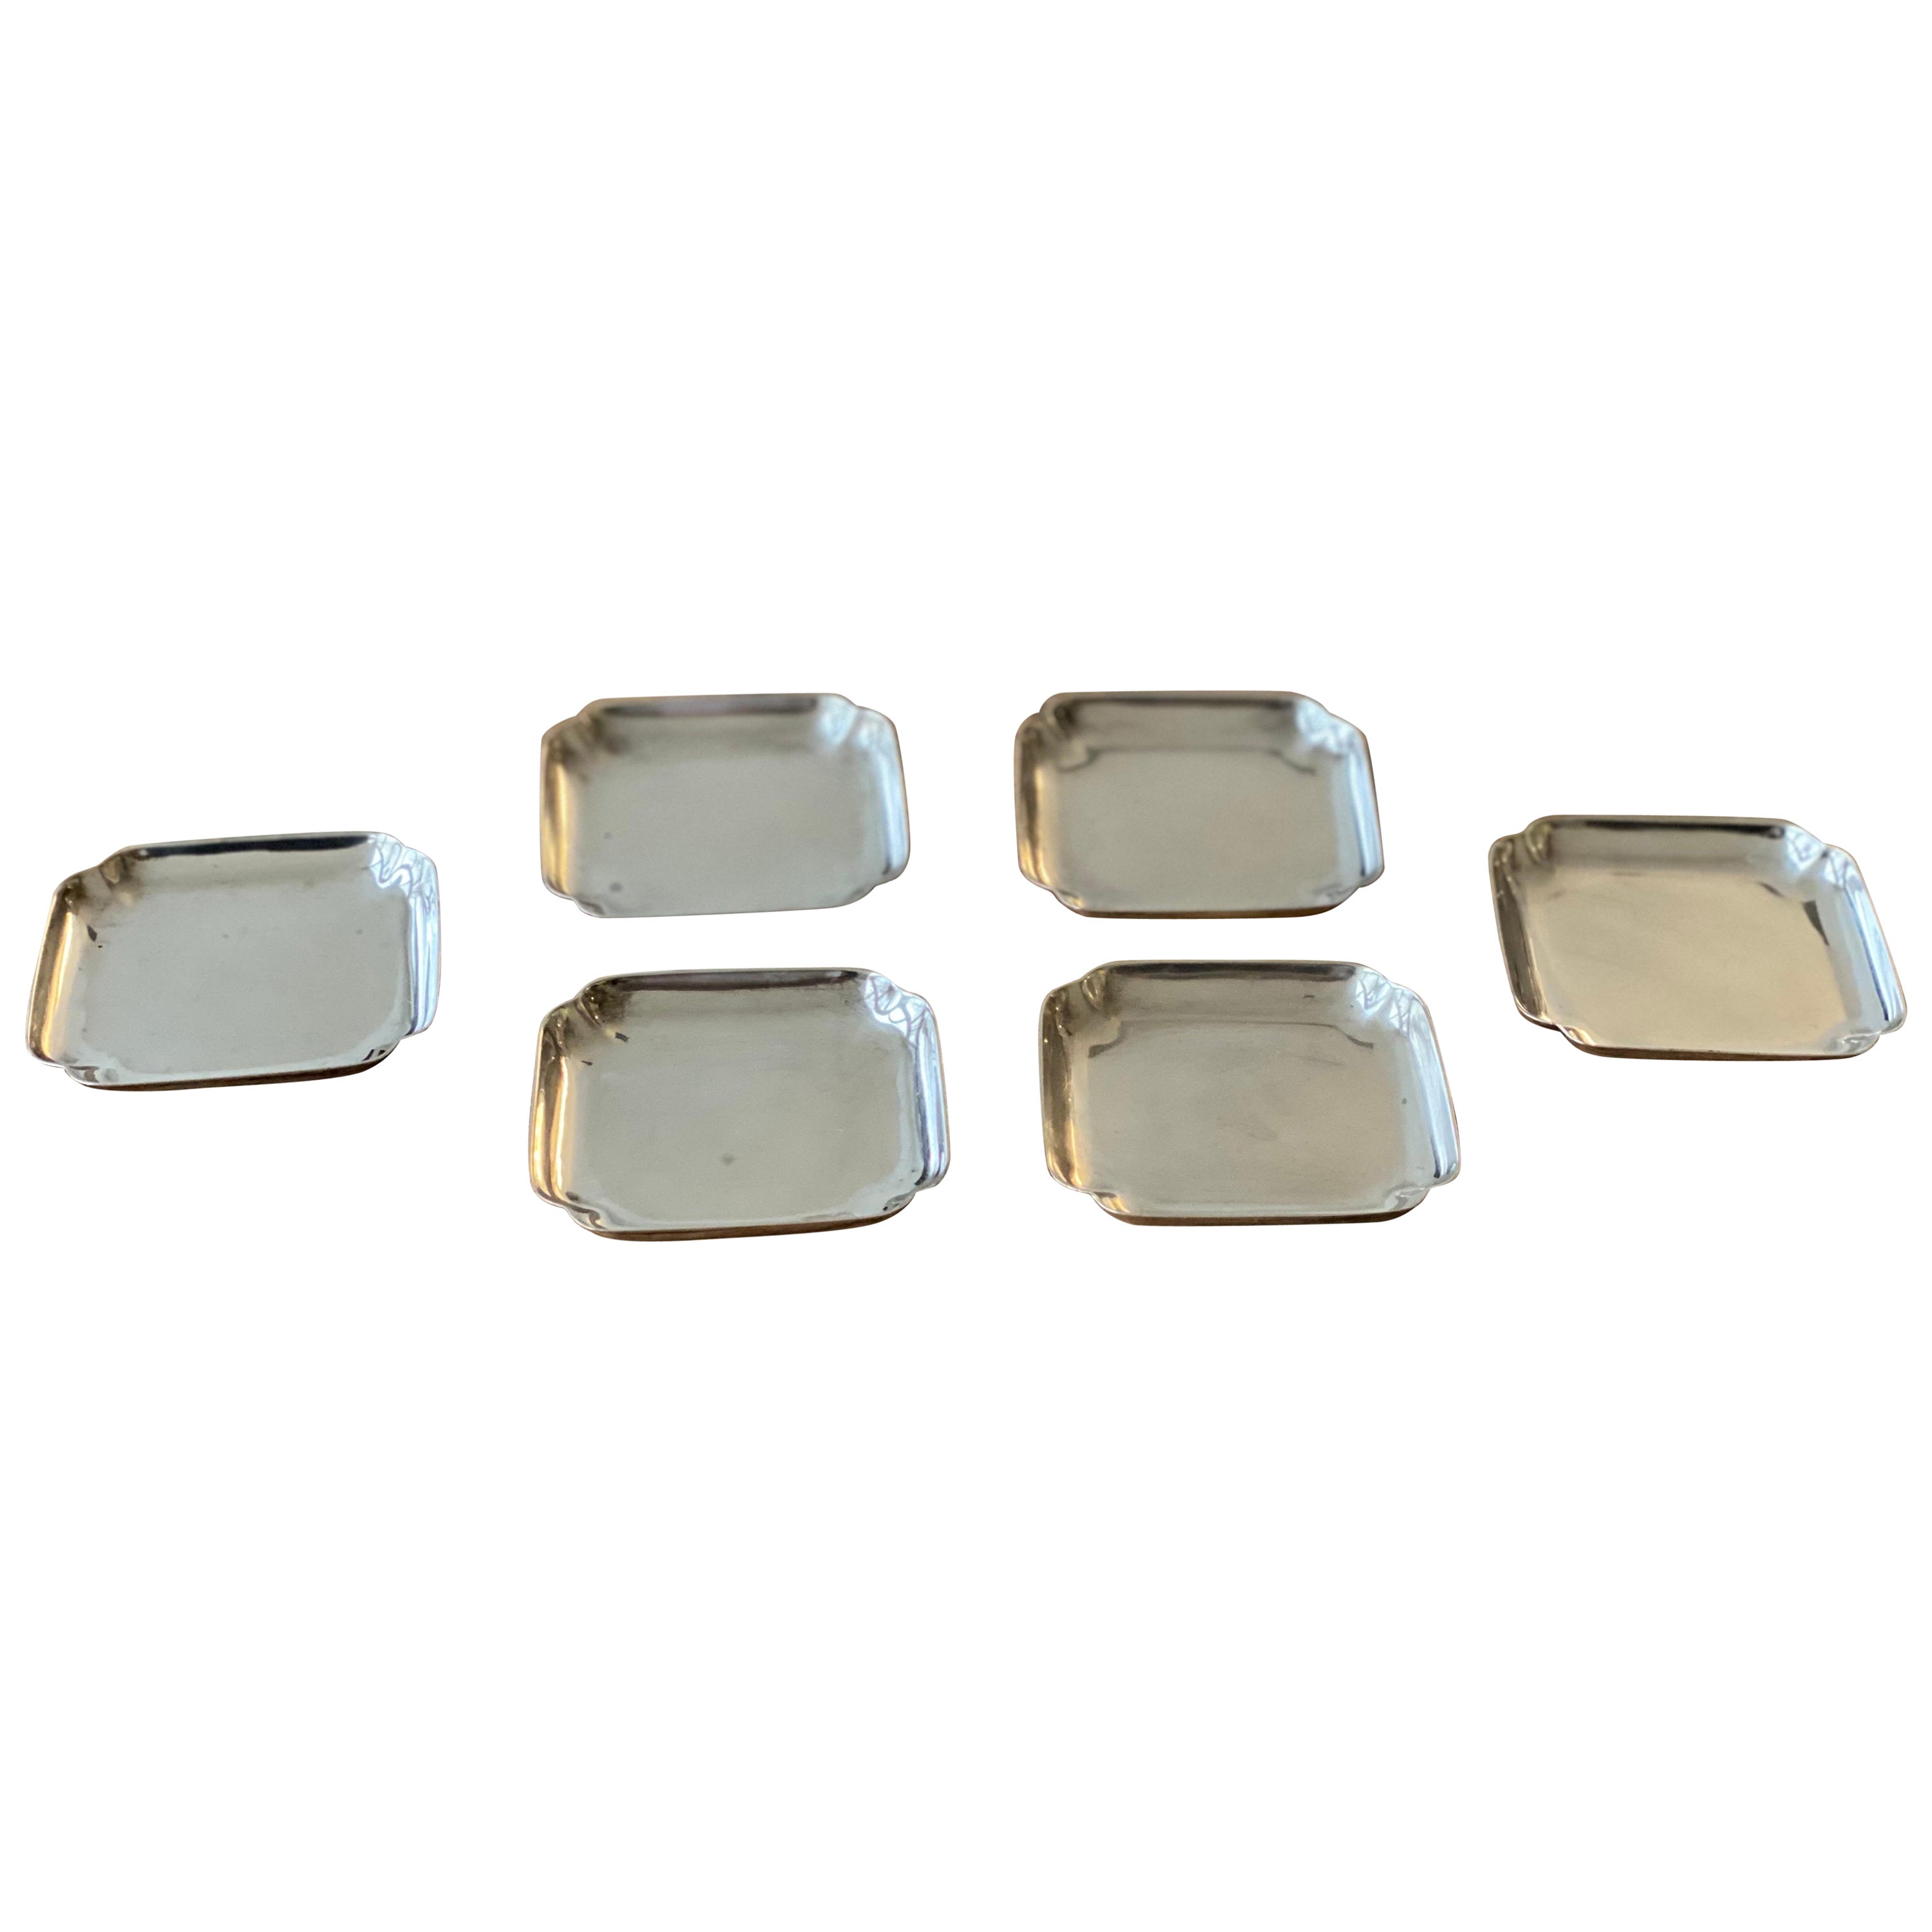 Cartier Sterling Silver Nut Plates, Marked